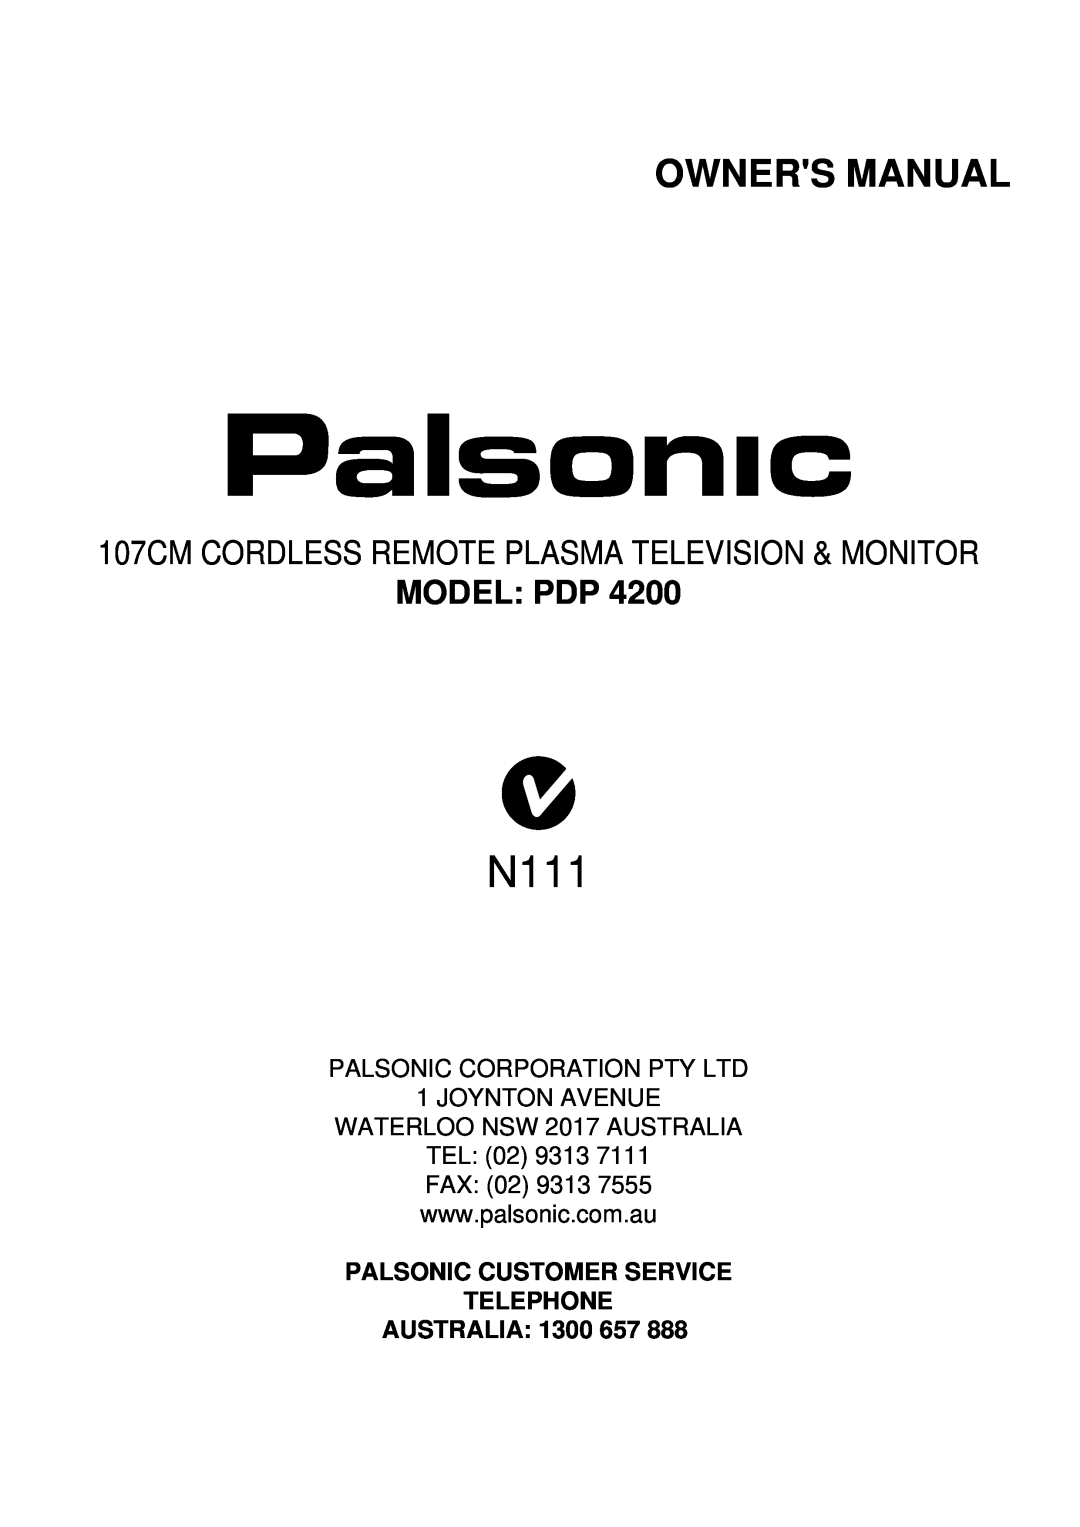 Palsonic PDP4200 owner manual N111, Owners Manual, 107CM CORDLESS REMOTE PLASMA TELEVISION & MONITOR, Model Pdp 